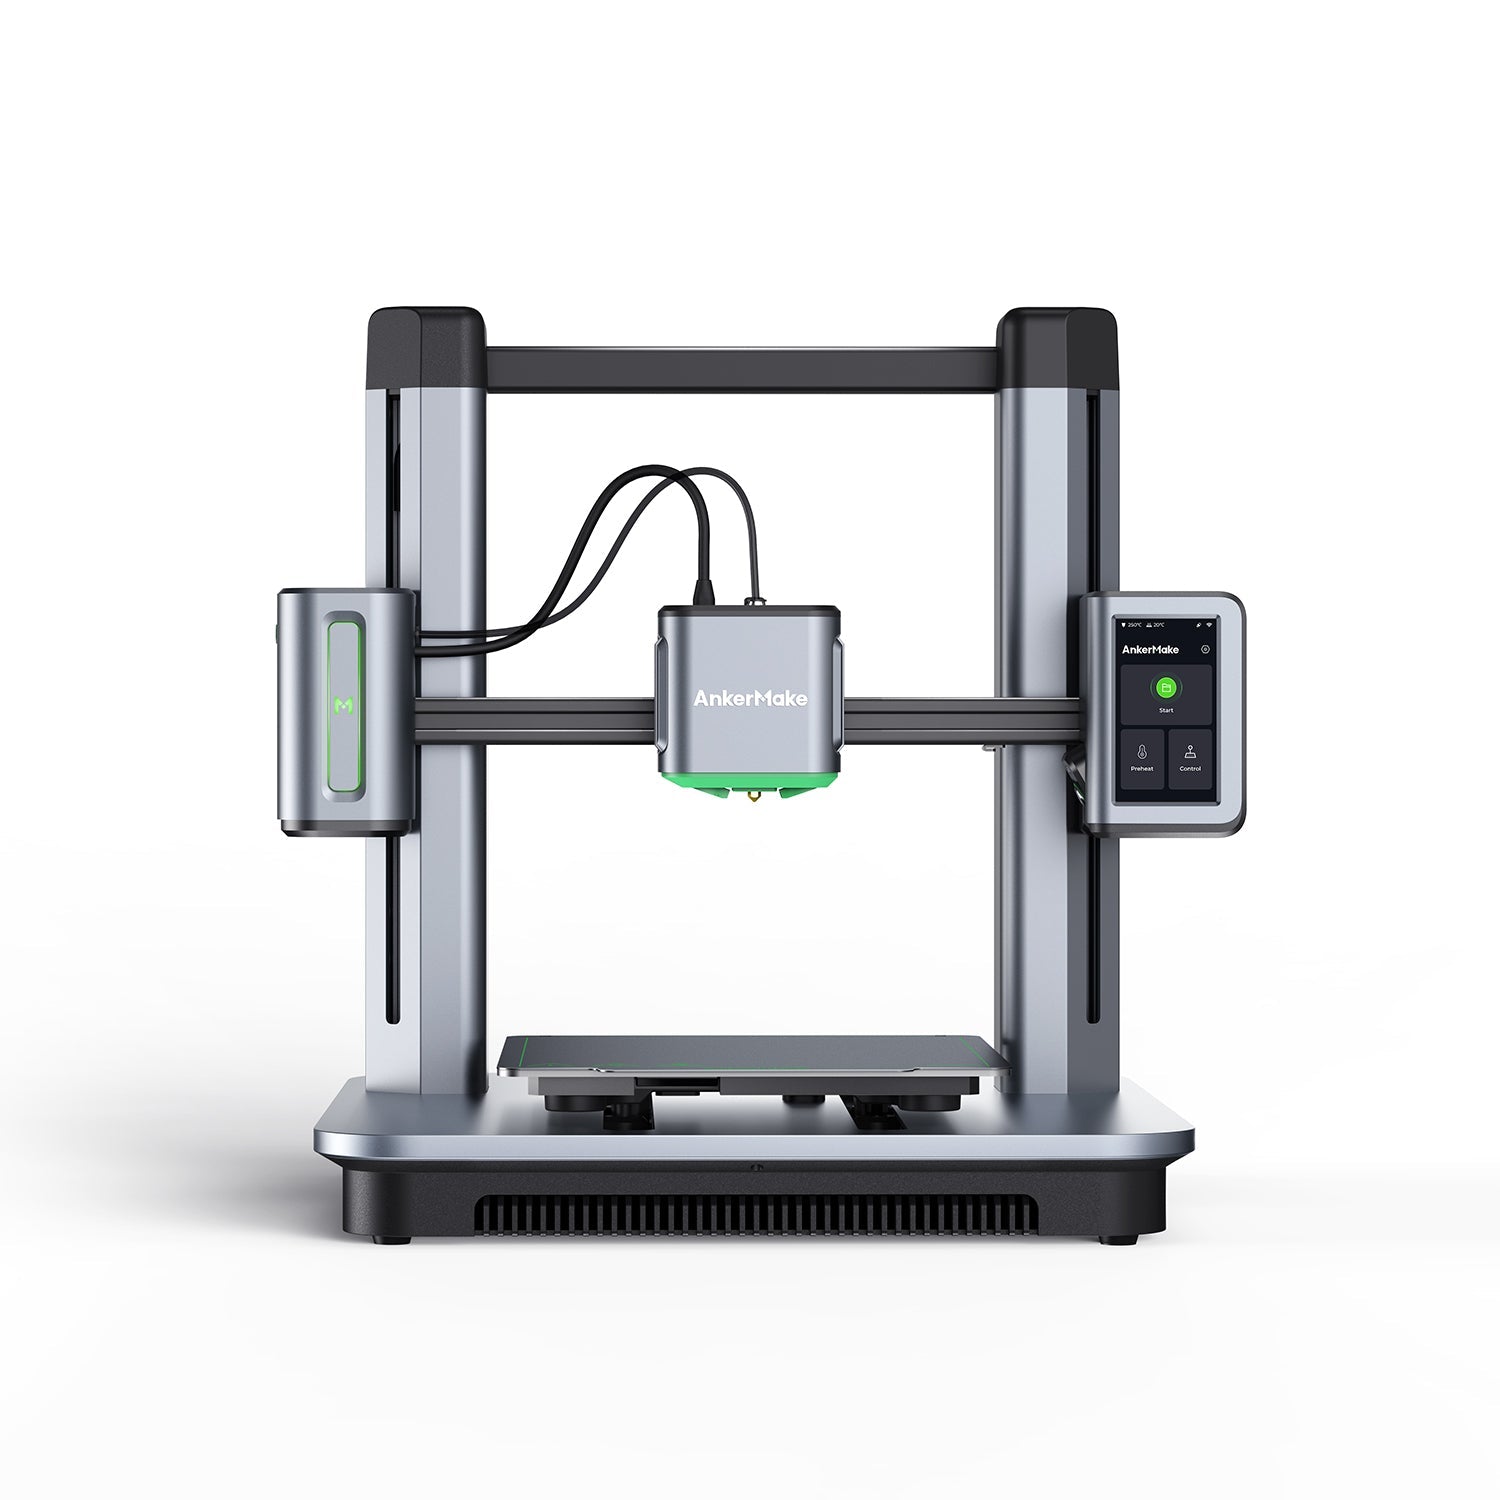 Beginners Guide to 3D Printing - Ankermake US